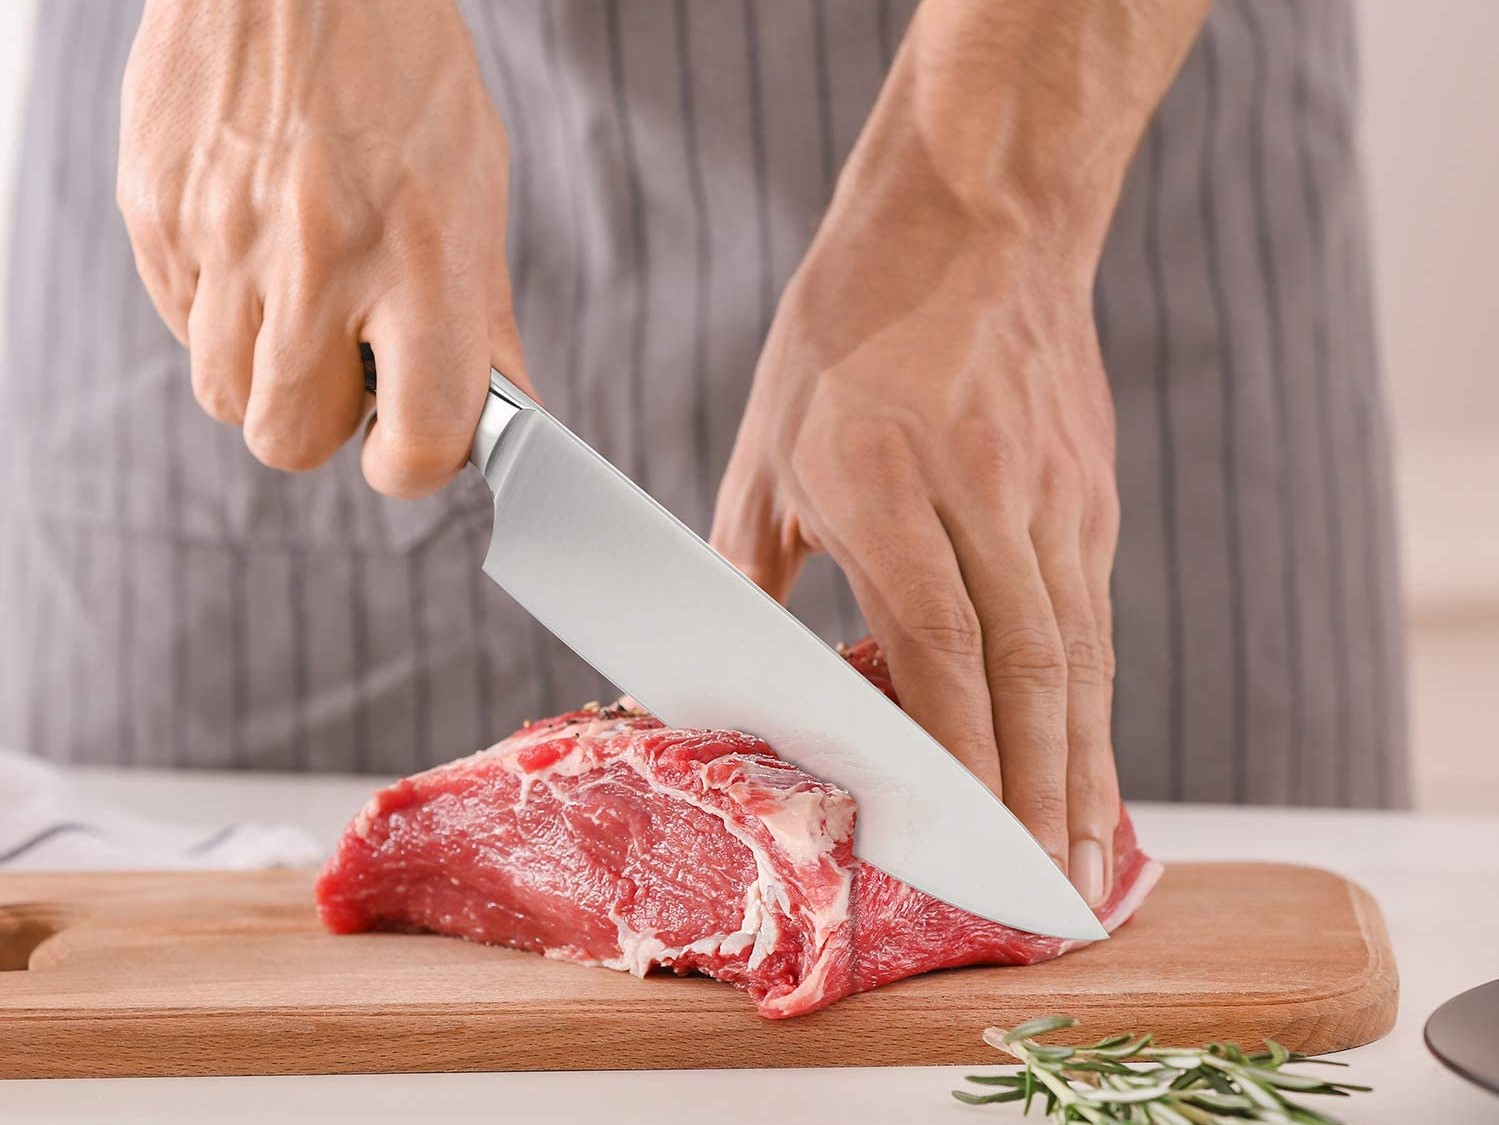 https://www.themanual.com/wp-content/uploads/sites/9/2021/09/imarku-chef-knife-used-to-cut-a-juicy-steak.jpg?p=1